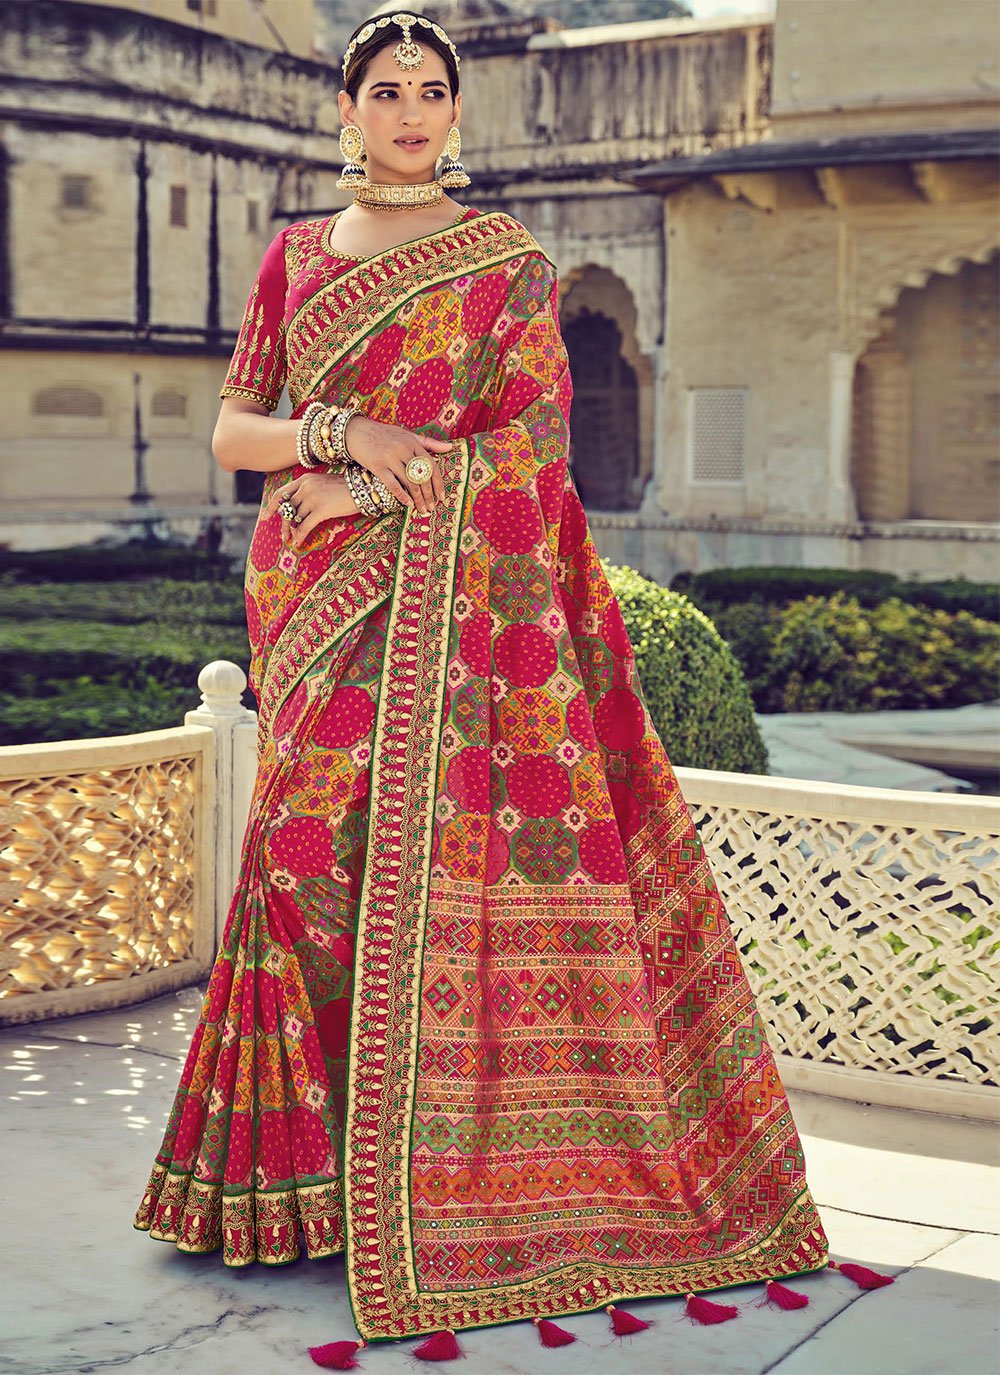 Red and Gold Bridal Saree - Etsy Singapore